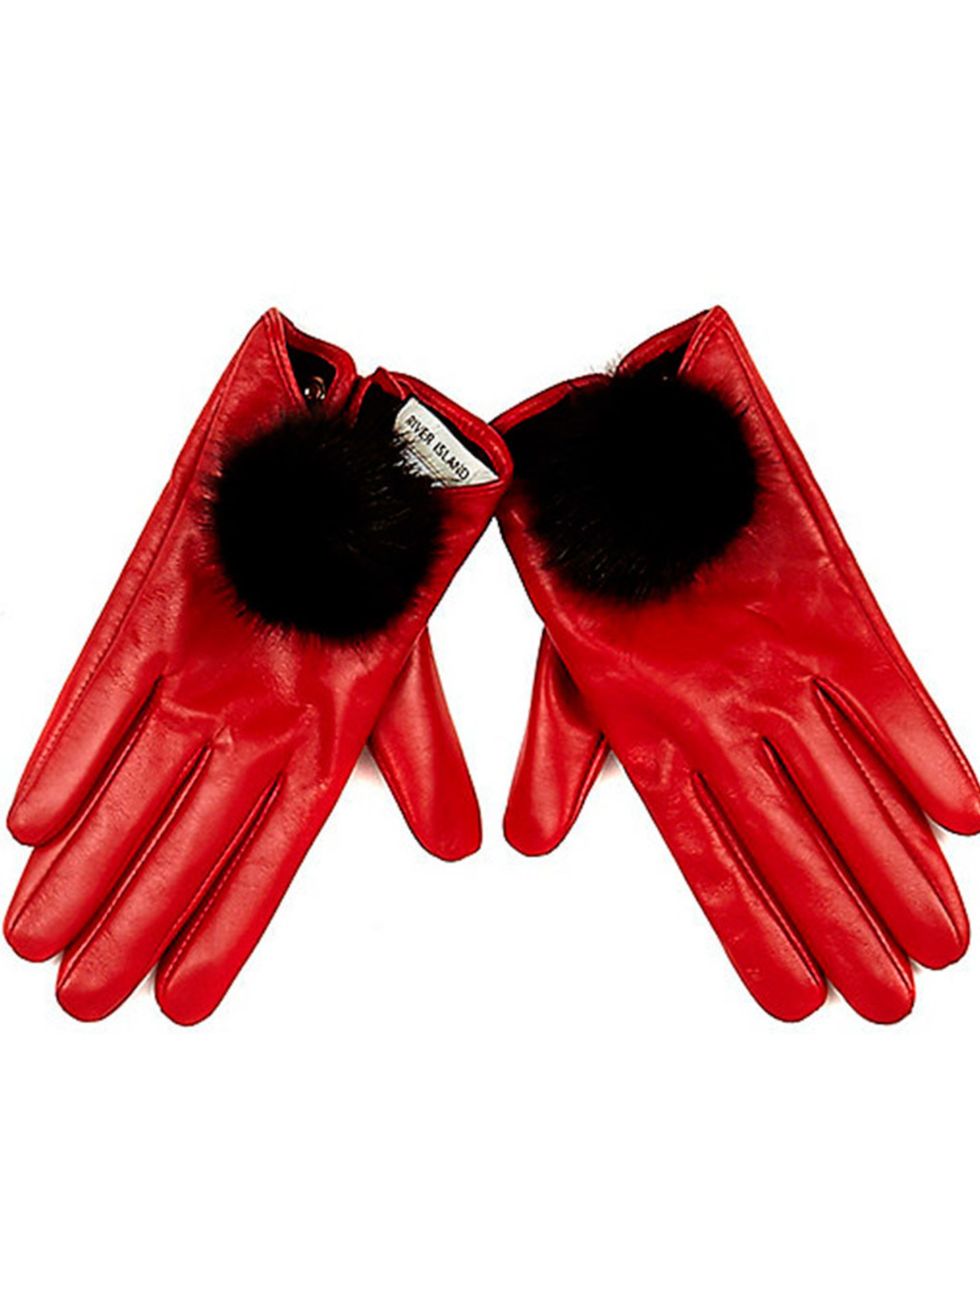 <p><a href="http://www.riverisland.com/women/accessories/gloves/red-leather-pom-pom-gloves-670844" target="_blank">River Island leather gloves</a>, £25 + your RI 25% discount card = £18.75</p>